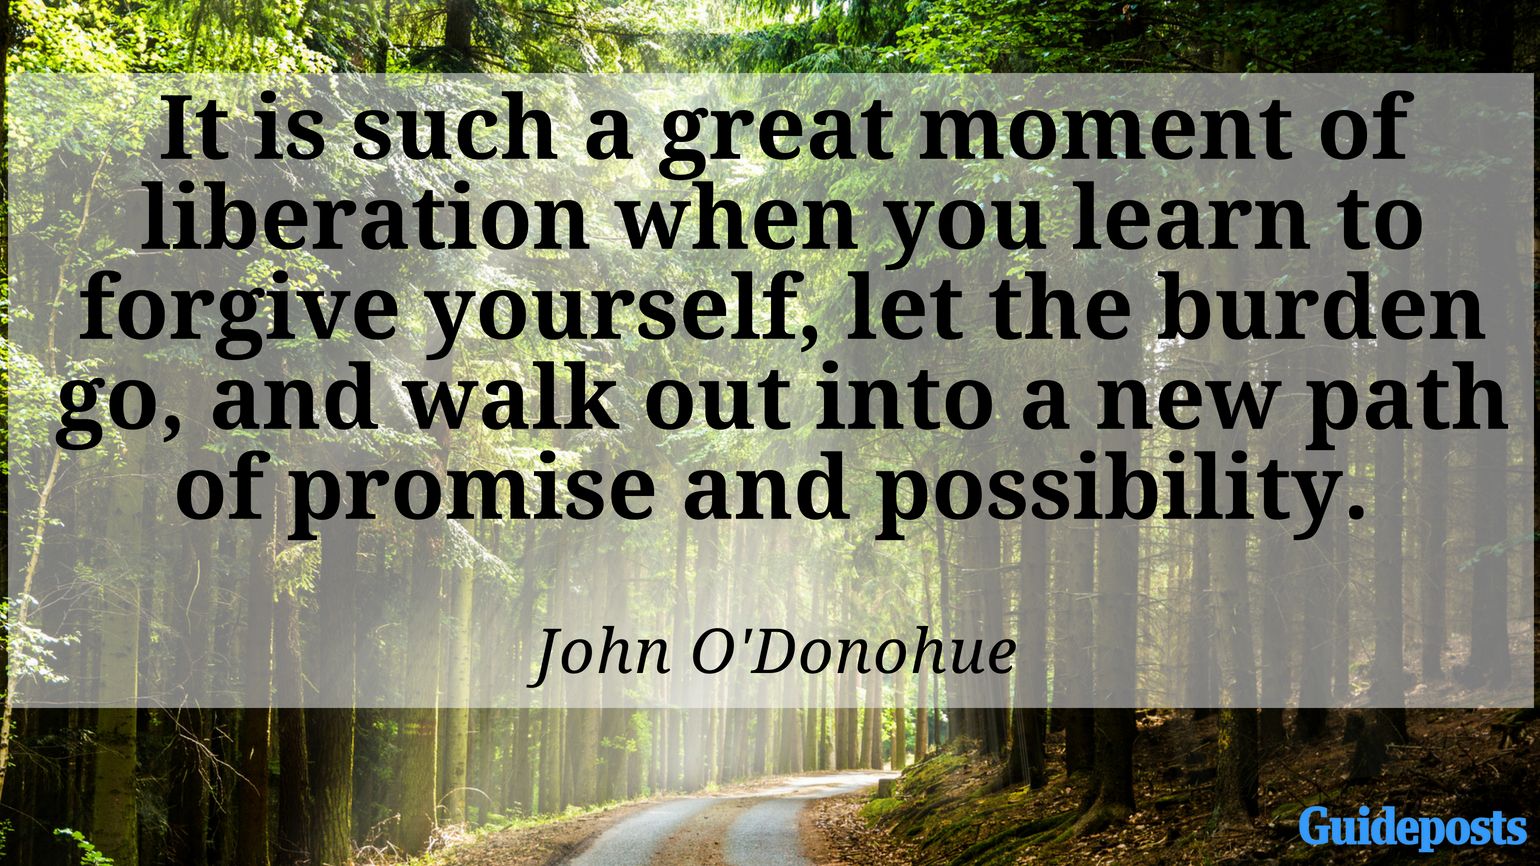 It is such a great moment of liberation when you learn to forgive yourself, let the burden go, and walk out into a new path of promise and possibility. ― John O'Donohue